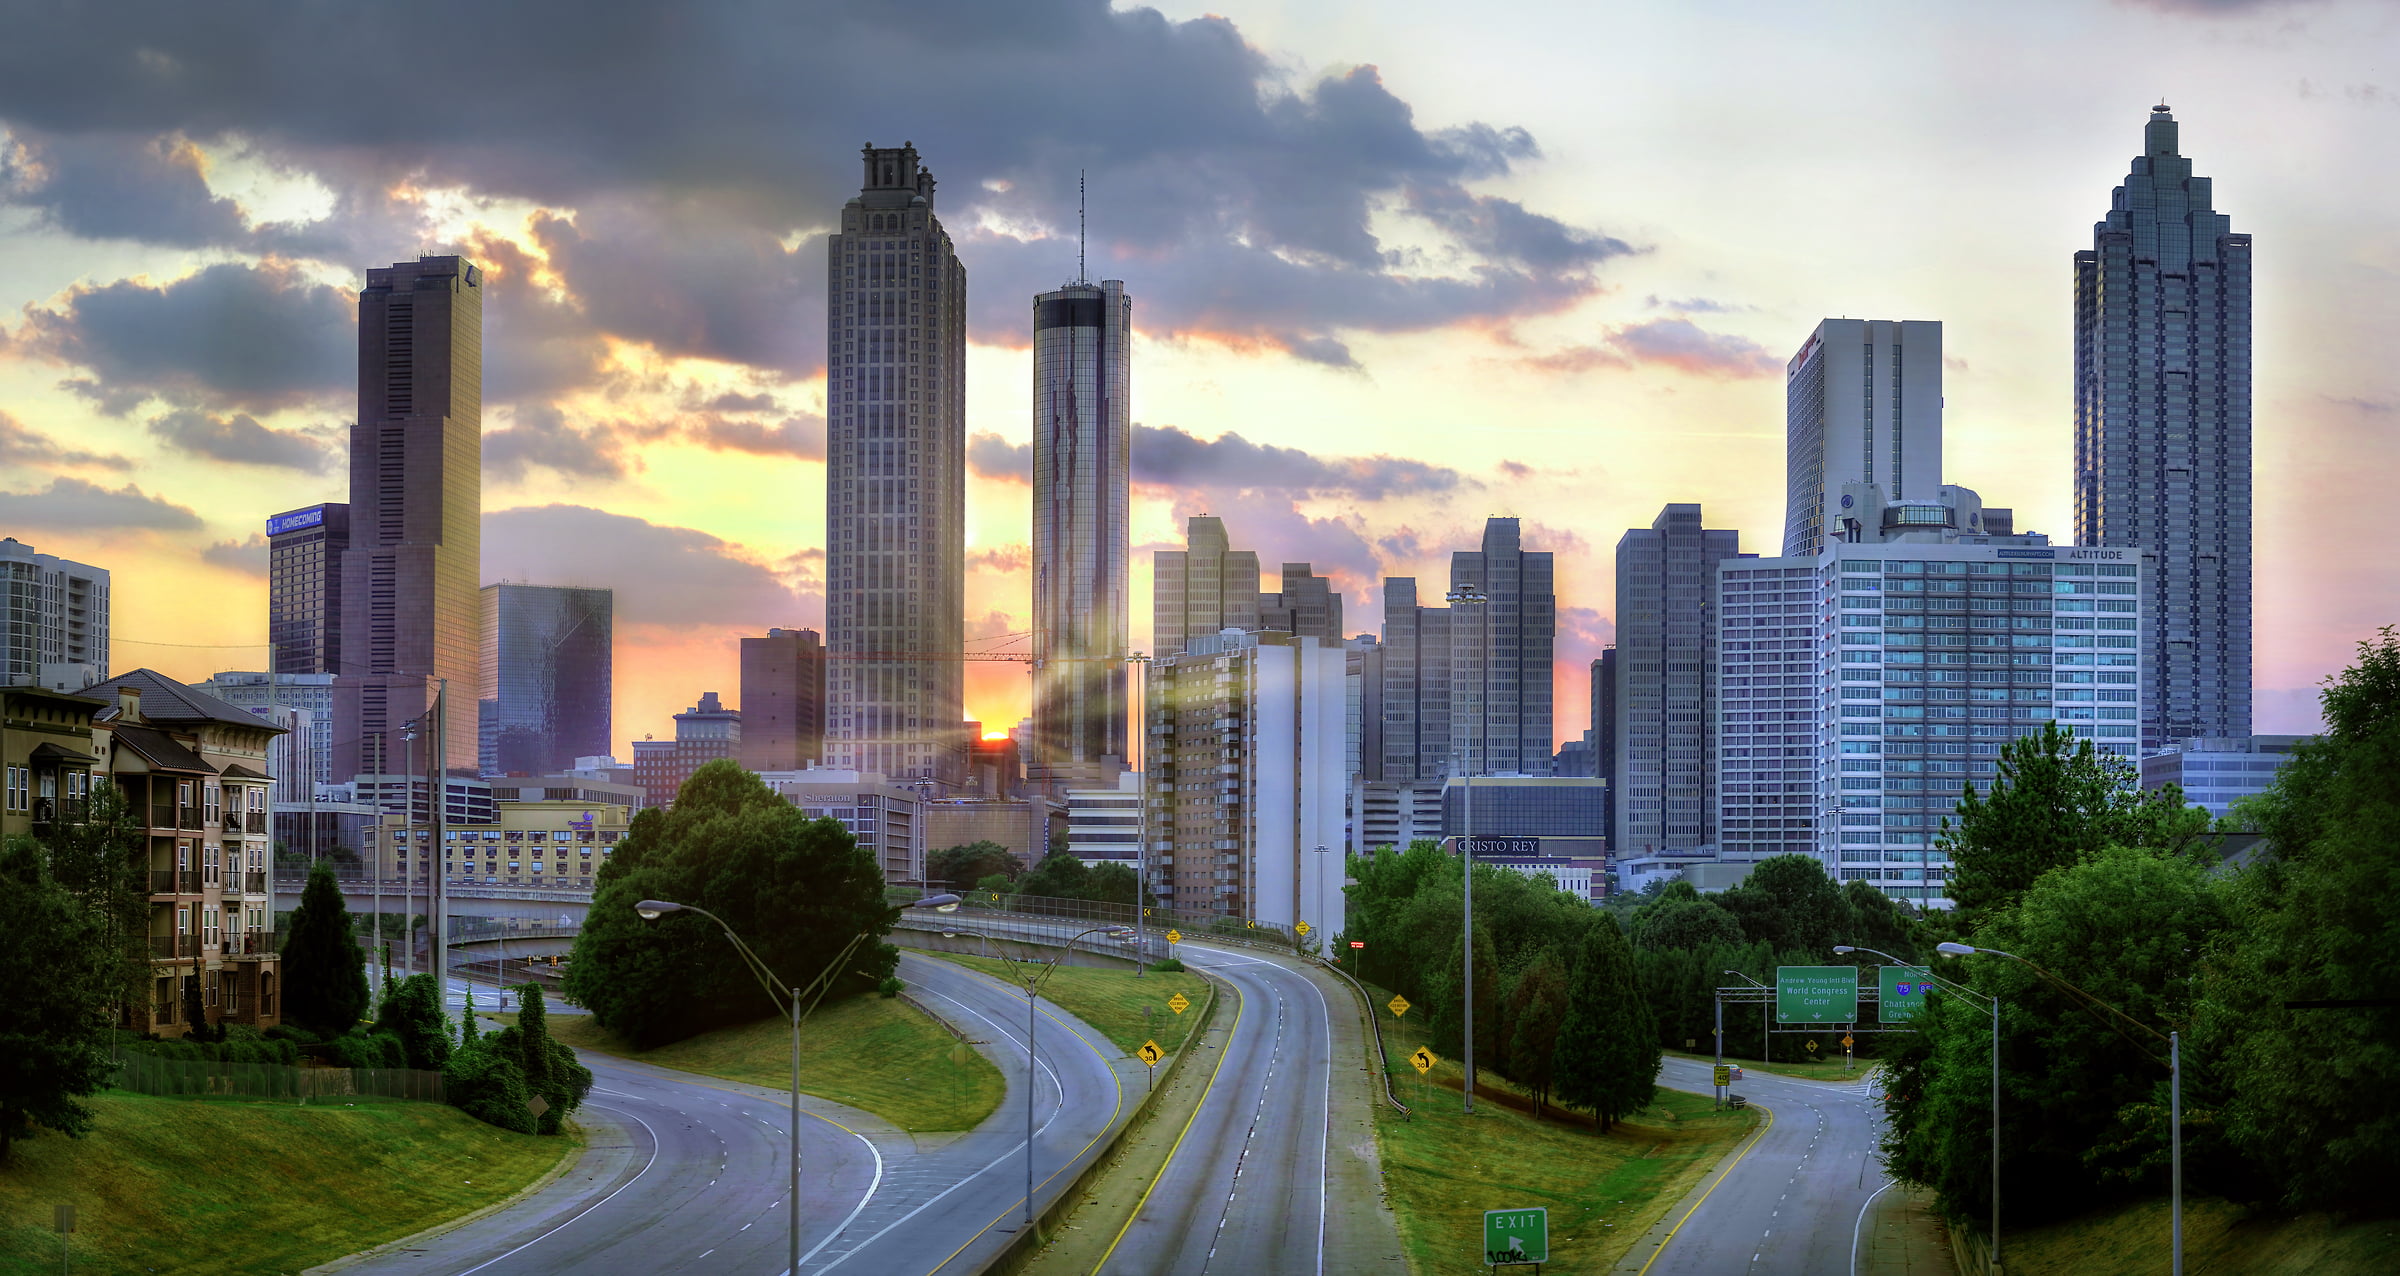 401 megapixels! A very high resolution, large-format VAST photo print of sunset over the downtown Atlanta skyline; cityscape photograph created by Phil Crawshay in Atlanta, Georgia.